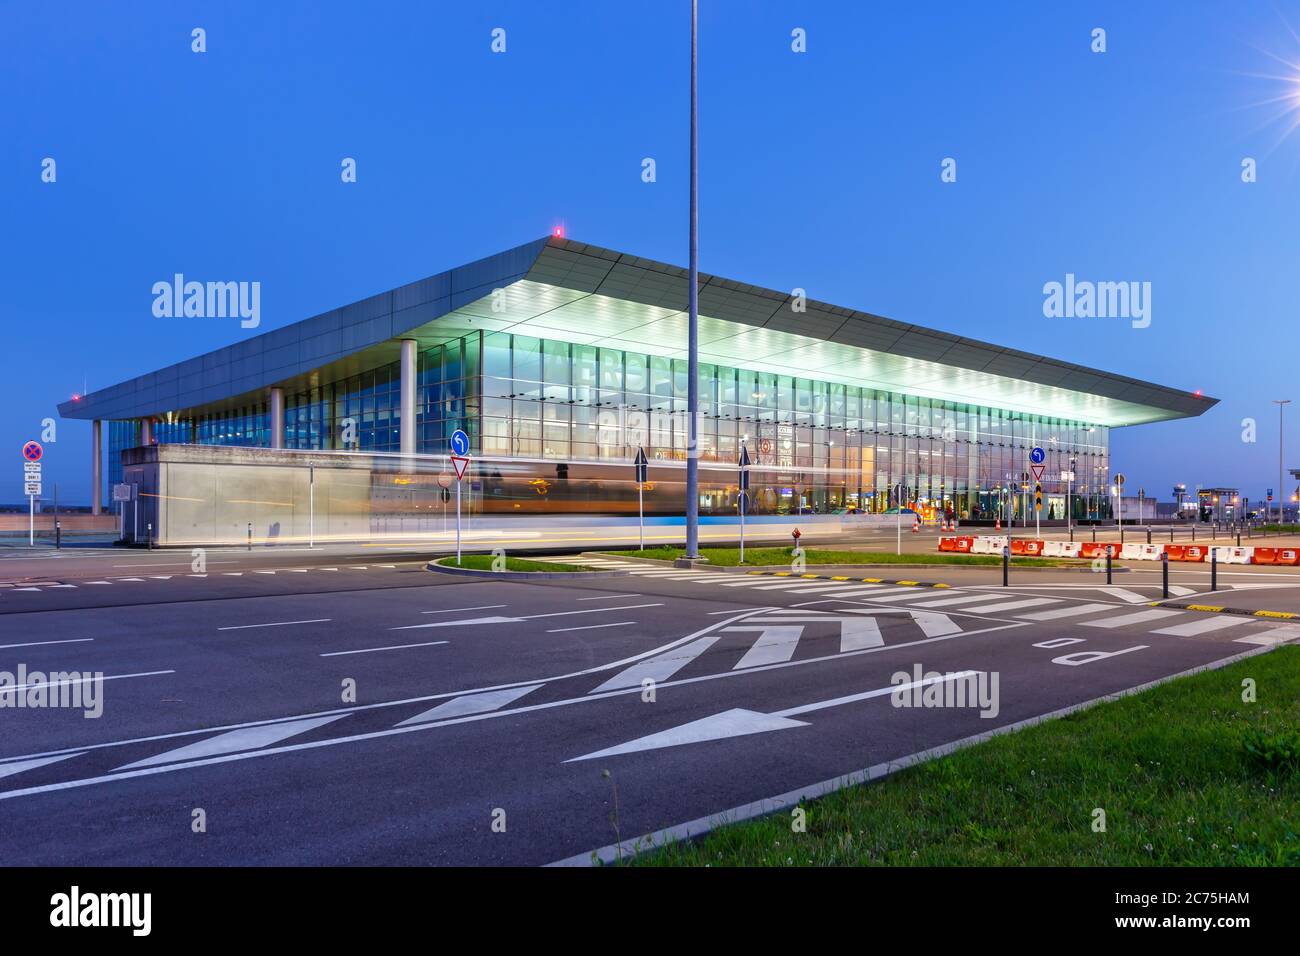 Findel, Luxembourg - June 23, 2020: Terminal building of Findel airport (LUX) in Luxemburg. Stock Photo